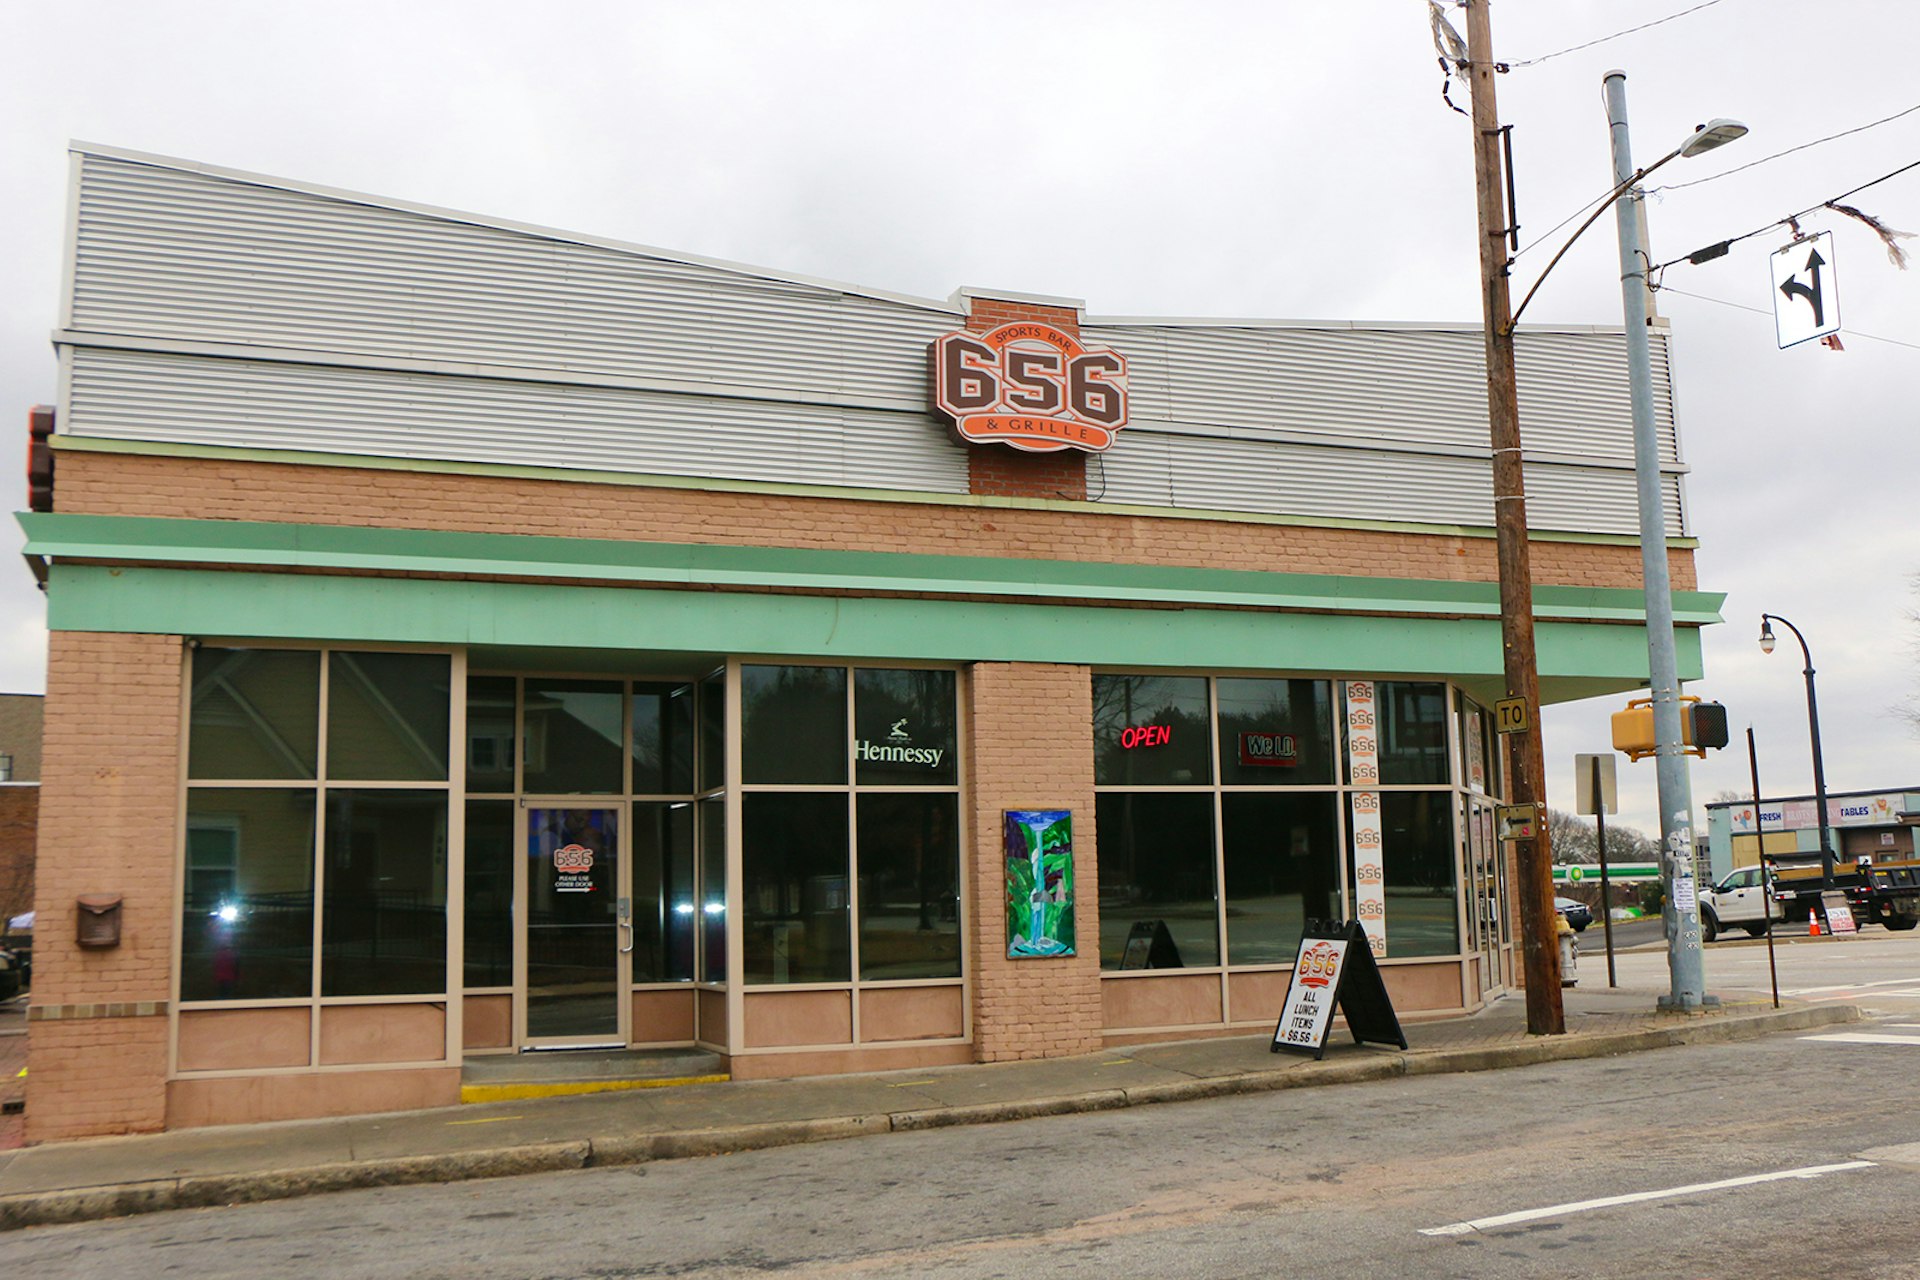 Facade of 656 sports bar, a one-story building in gold brick with an aluminum mid-century roof signage